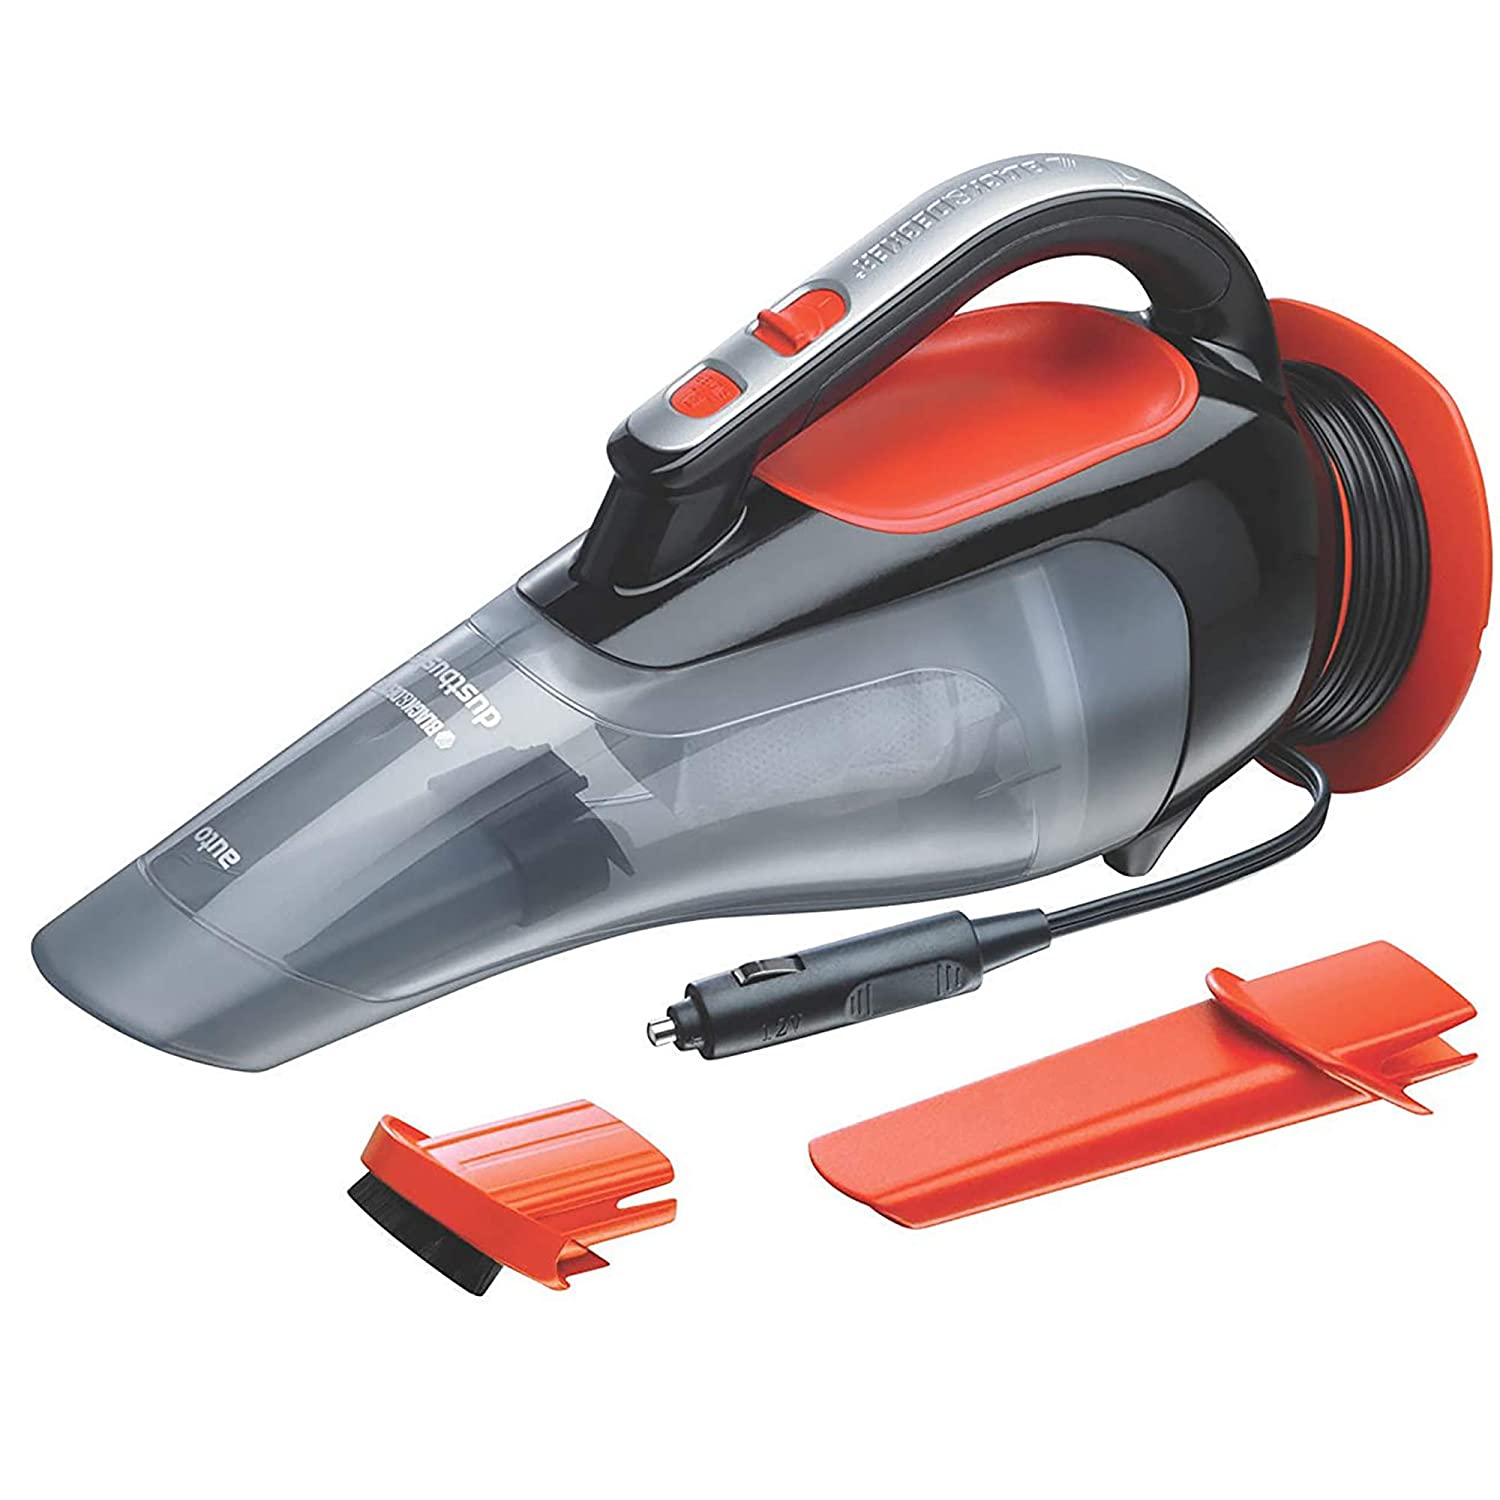 Black + Decker ADV1210 12V Powerful Dustbuster Automatic Car Vacuum Cleaner with 4 accessories (Black and Orange)-Car Accessories-dealsplant